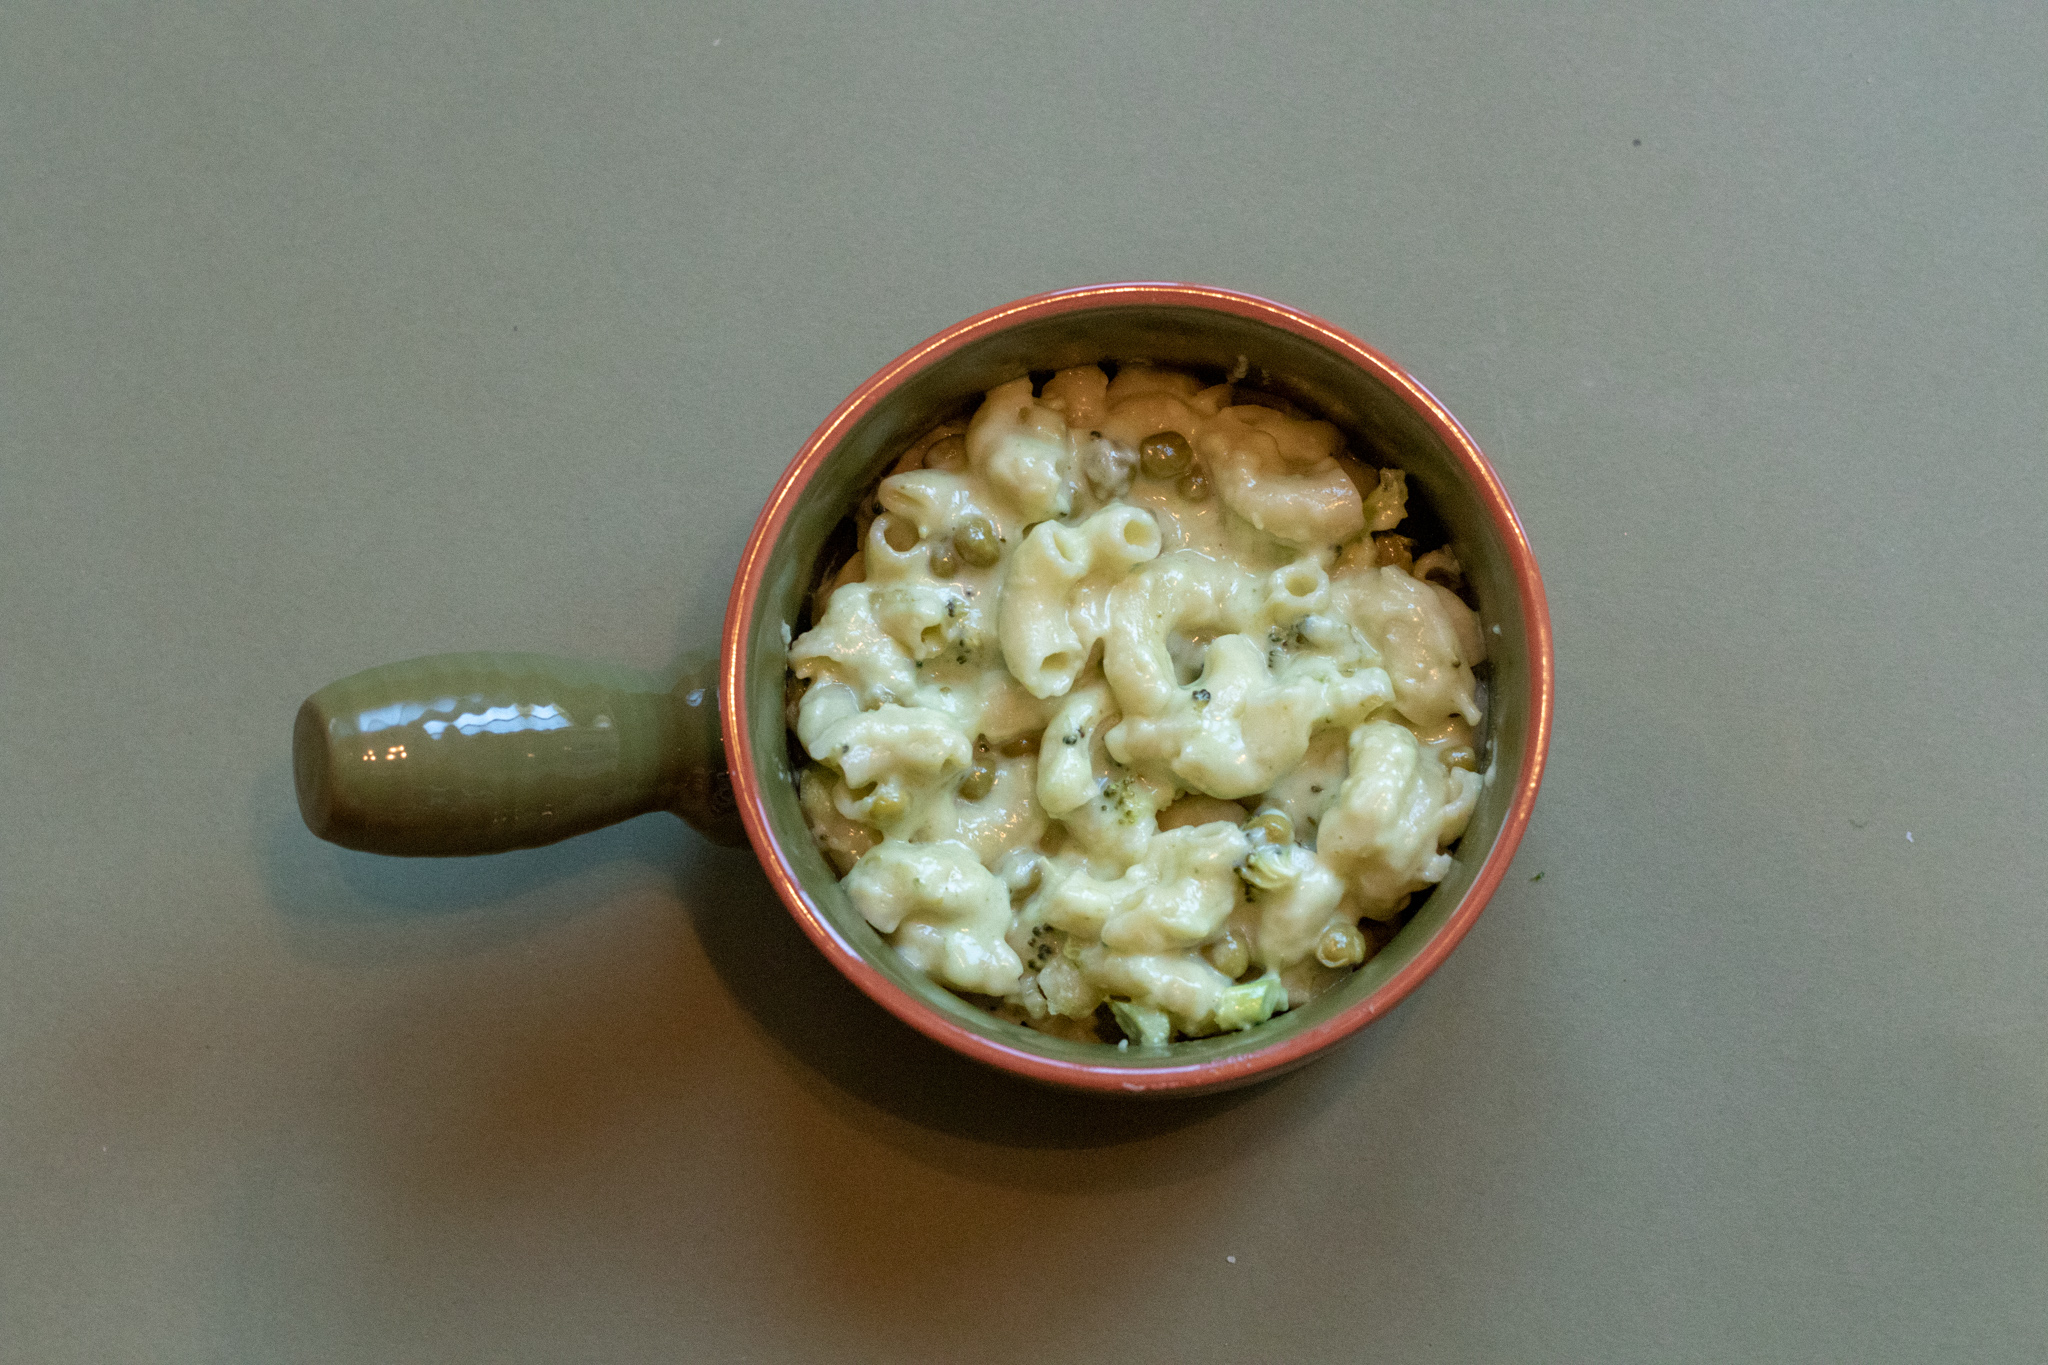 Veggie Macaroni and cheese in a green bow with an orange rim on a green background.